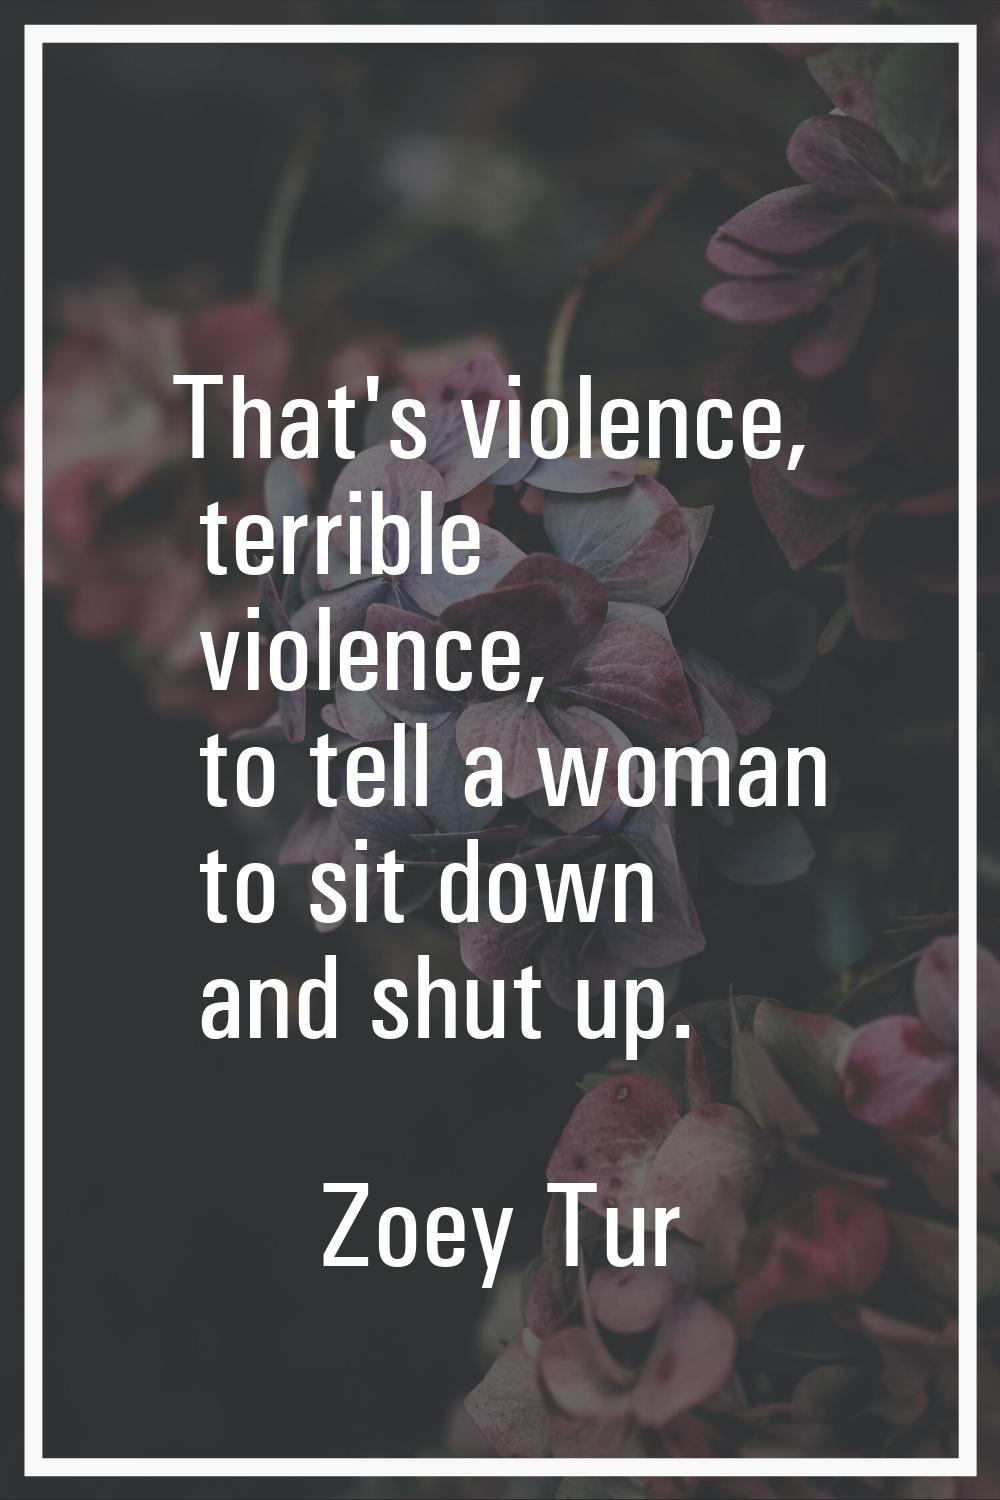 That's violence, terrible violence, to tell a woman to sit down and shut up.